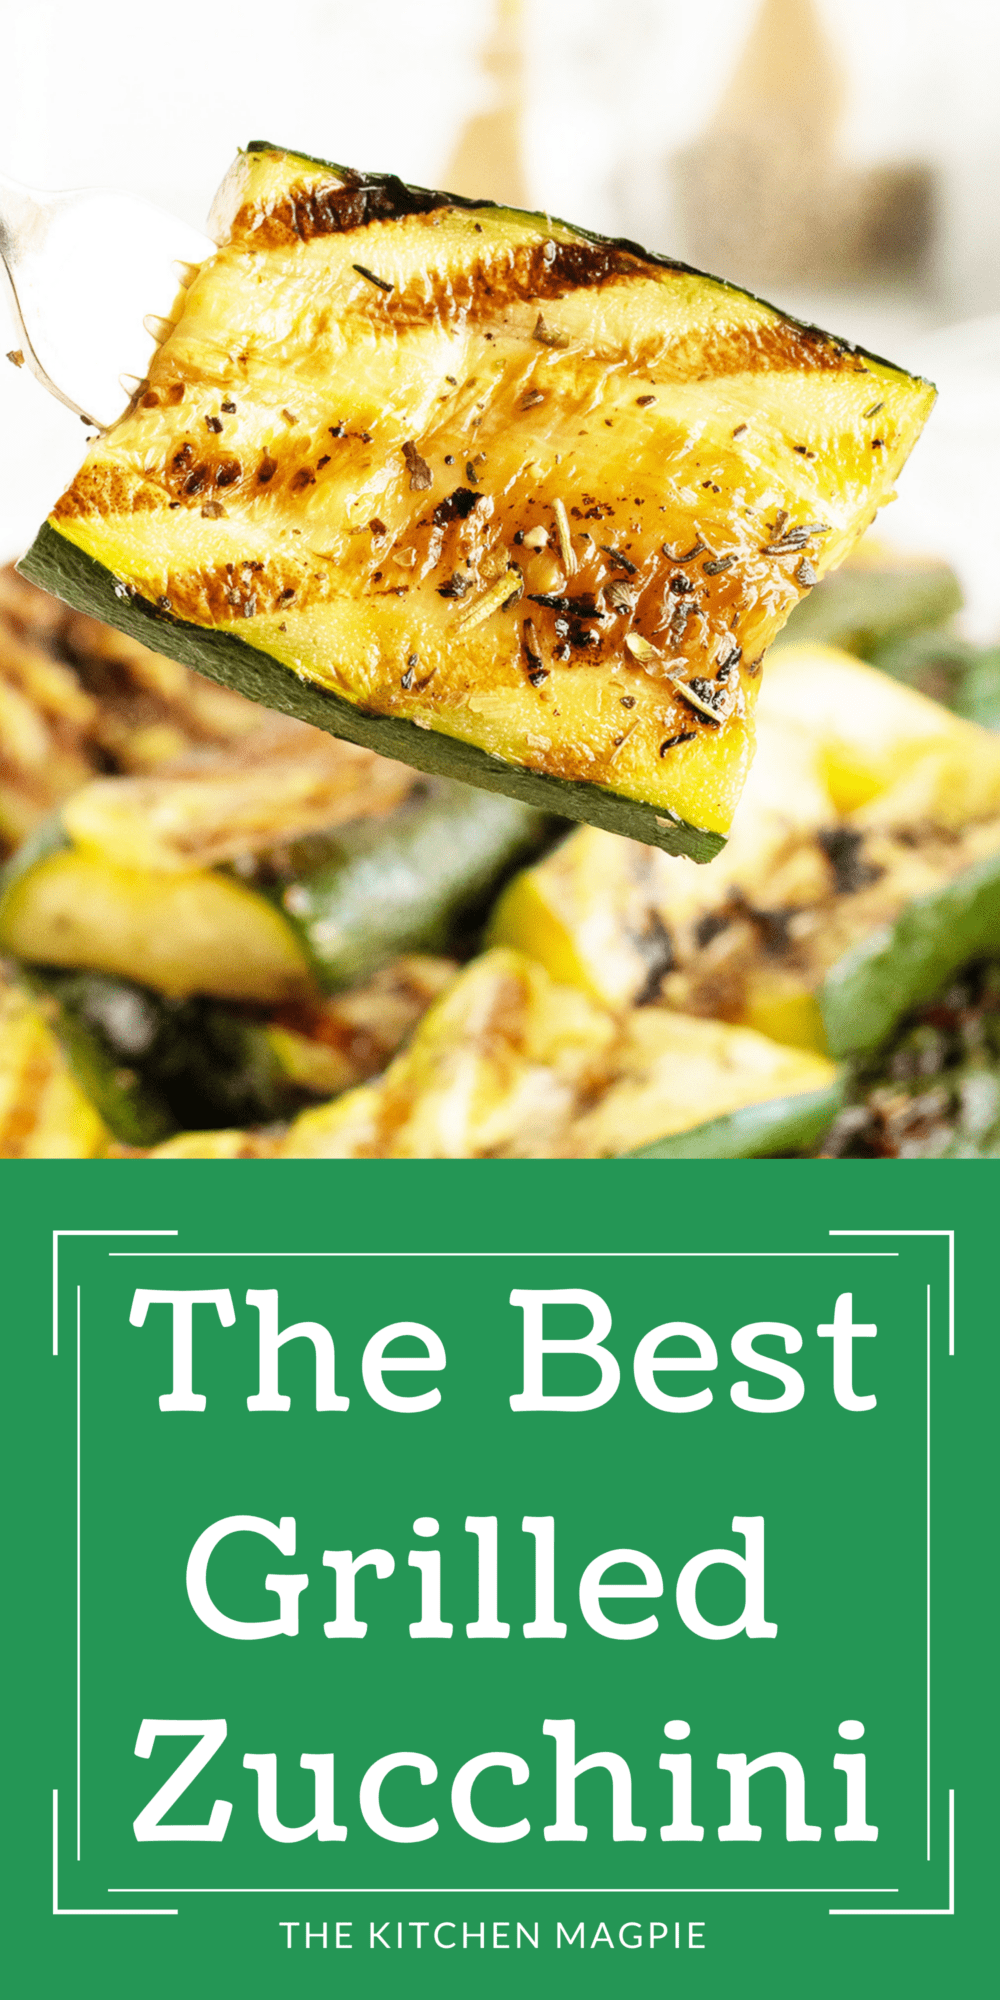 Fast, easy and healthy, this grilled zucchini uses ingredients that are already in your pantry and is a plentiful vegetable side dish!